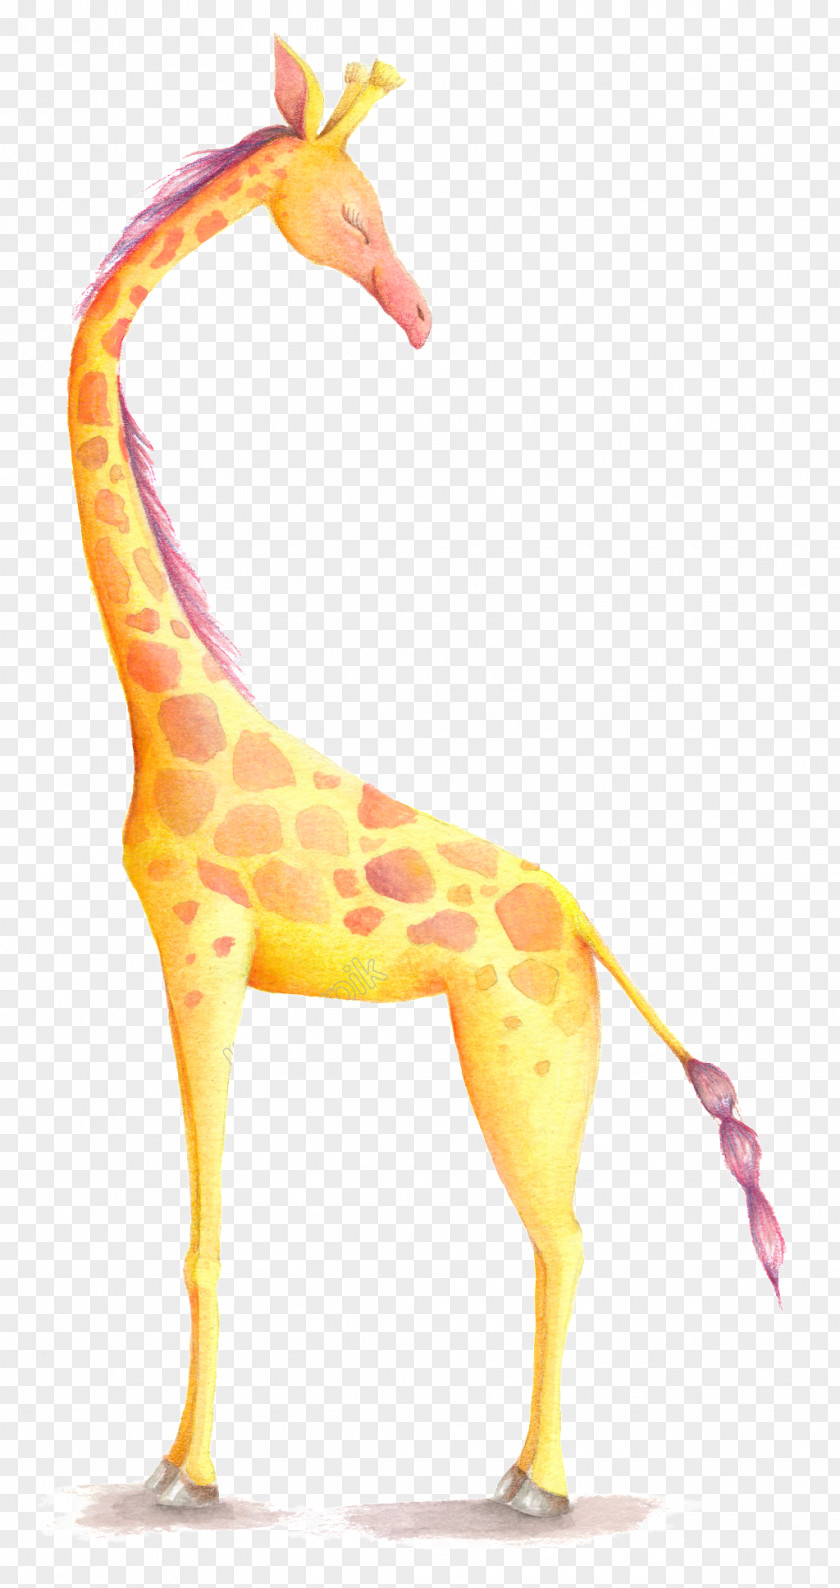 Giraffe Png Vector Jehovah's Witnesses Poster Bible PNG